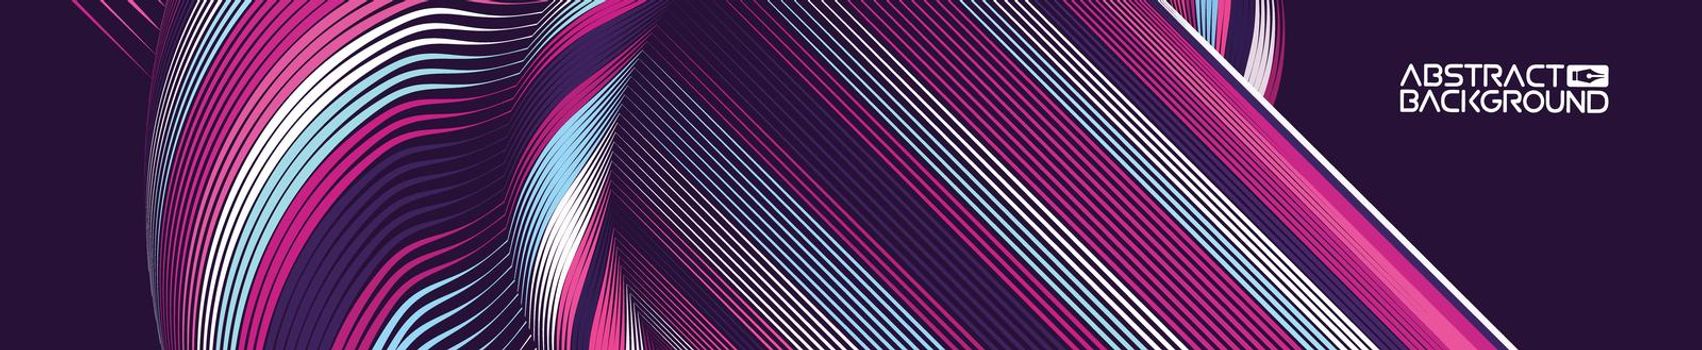 Abstract art backdrop. Colorful curly circle. Futuristic waves wallpaper with folds. Purple background .